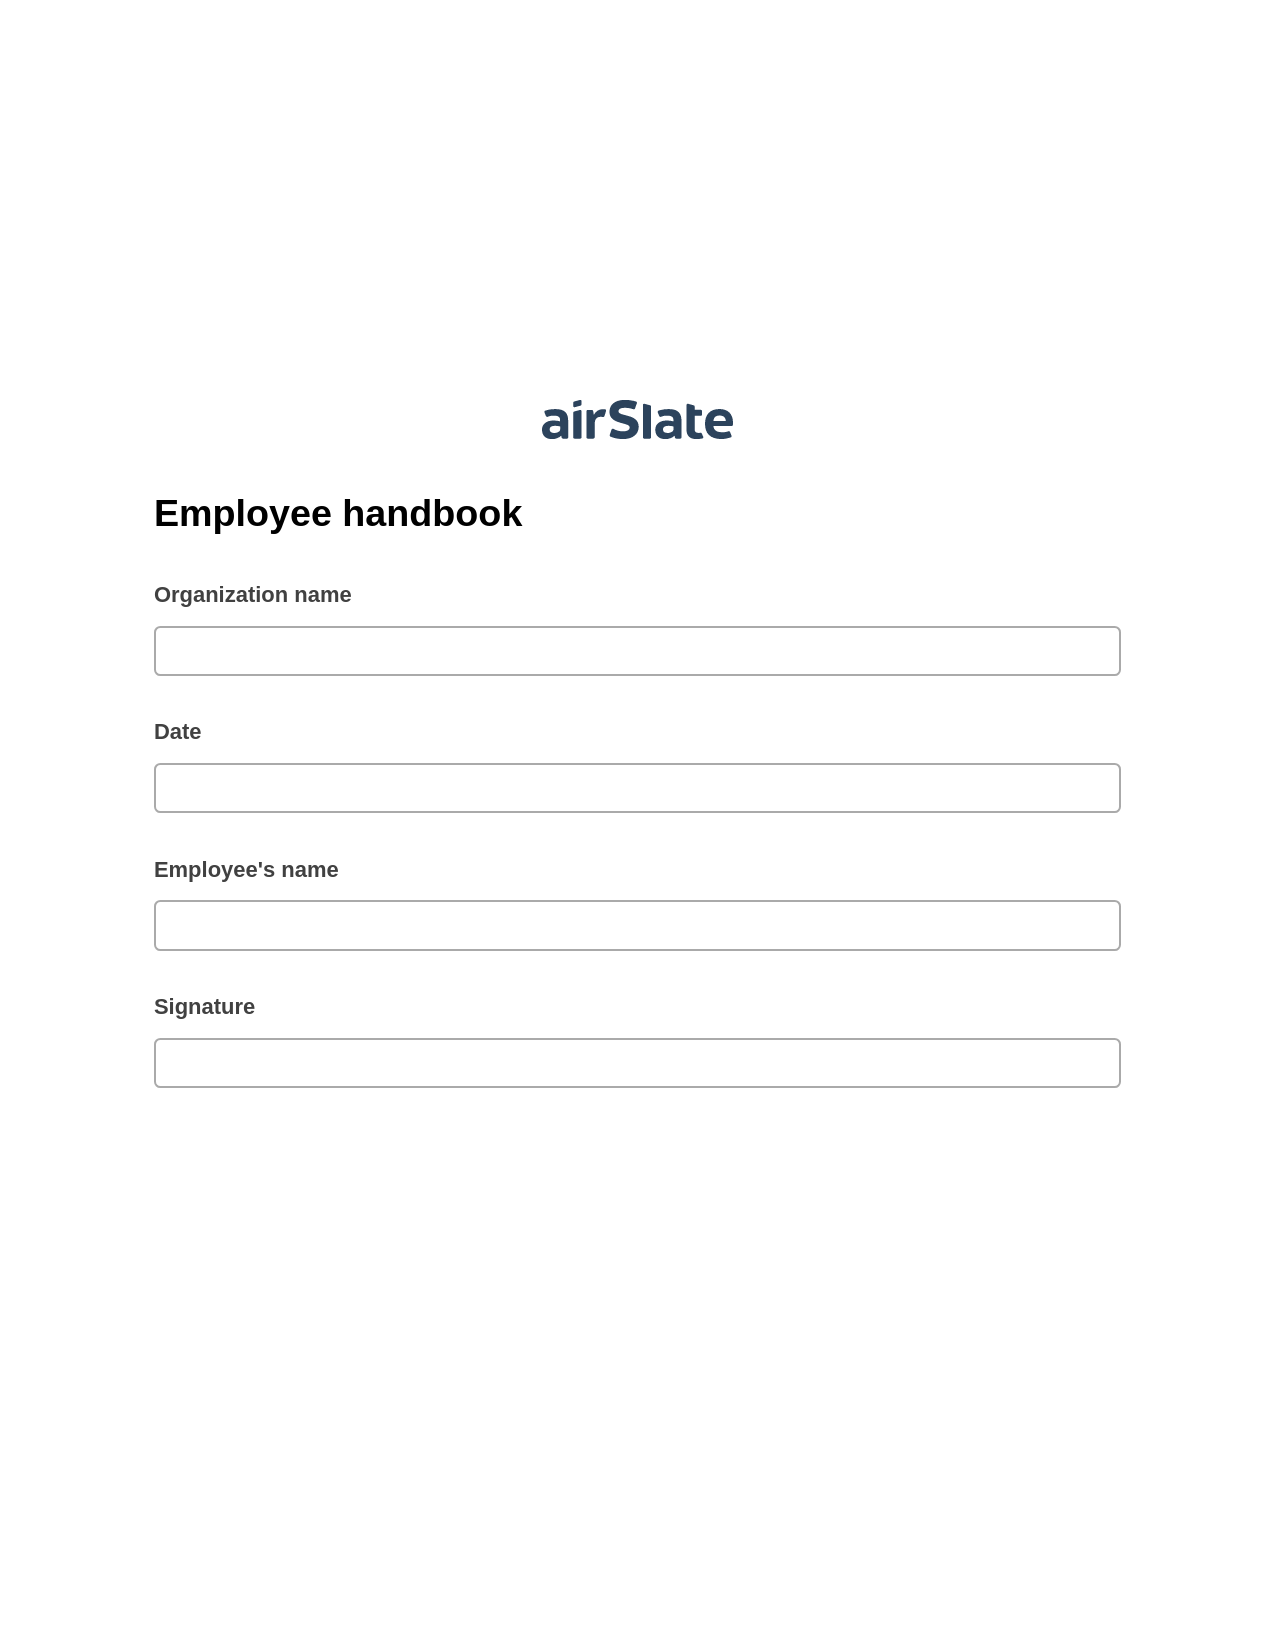 Multirole Employee handbook Pre-fill from NetSuite Records Bot, Pre-fill with Custom Data Bot, Email Notification Postfinish Bot